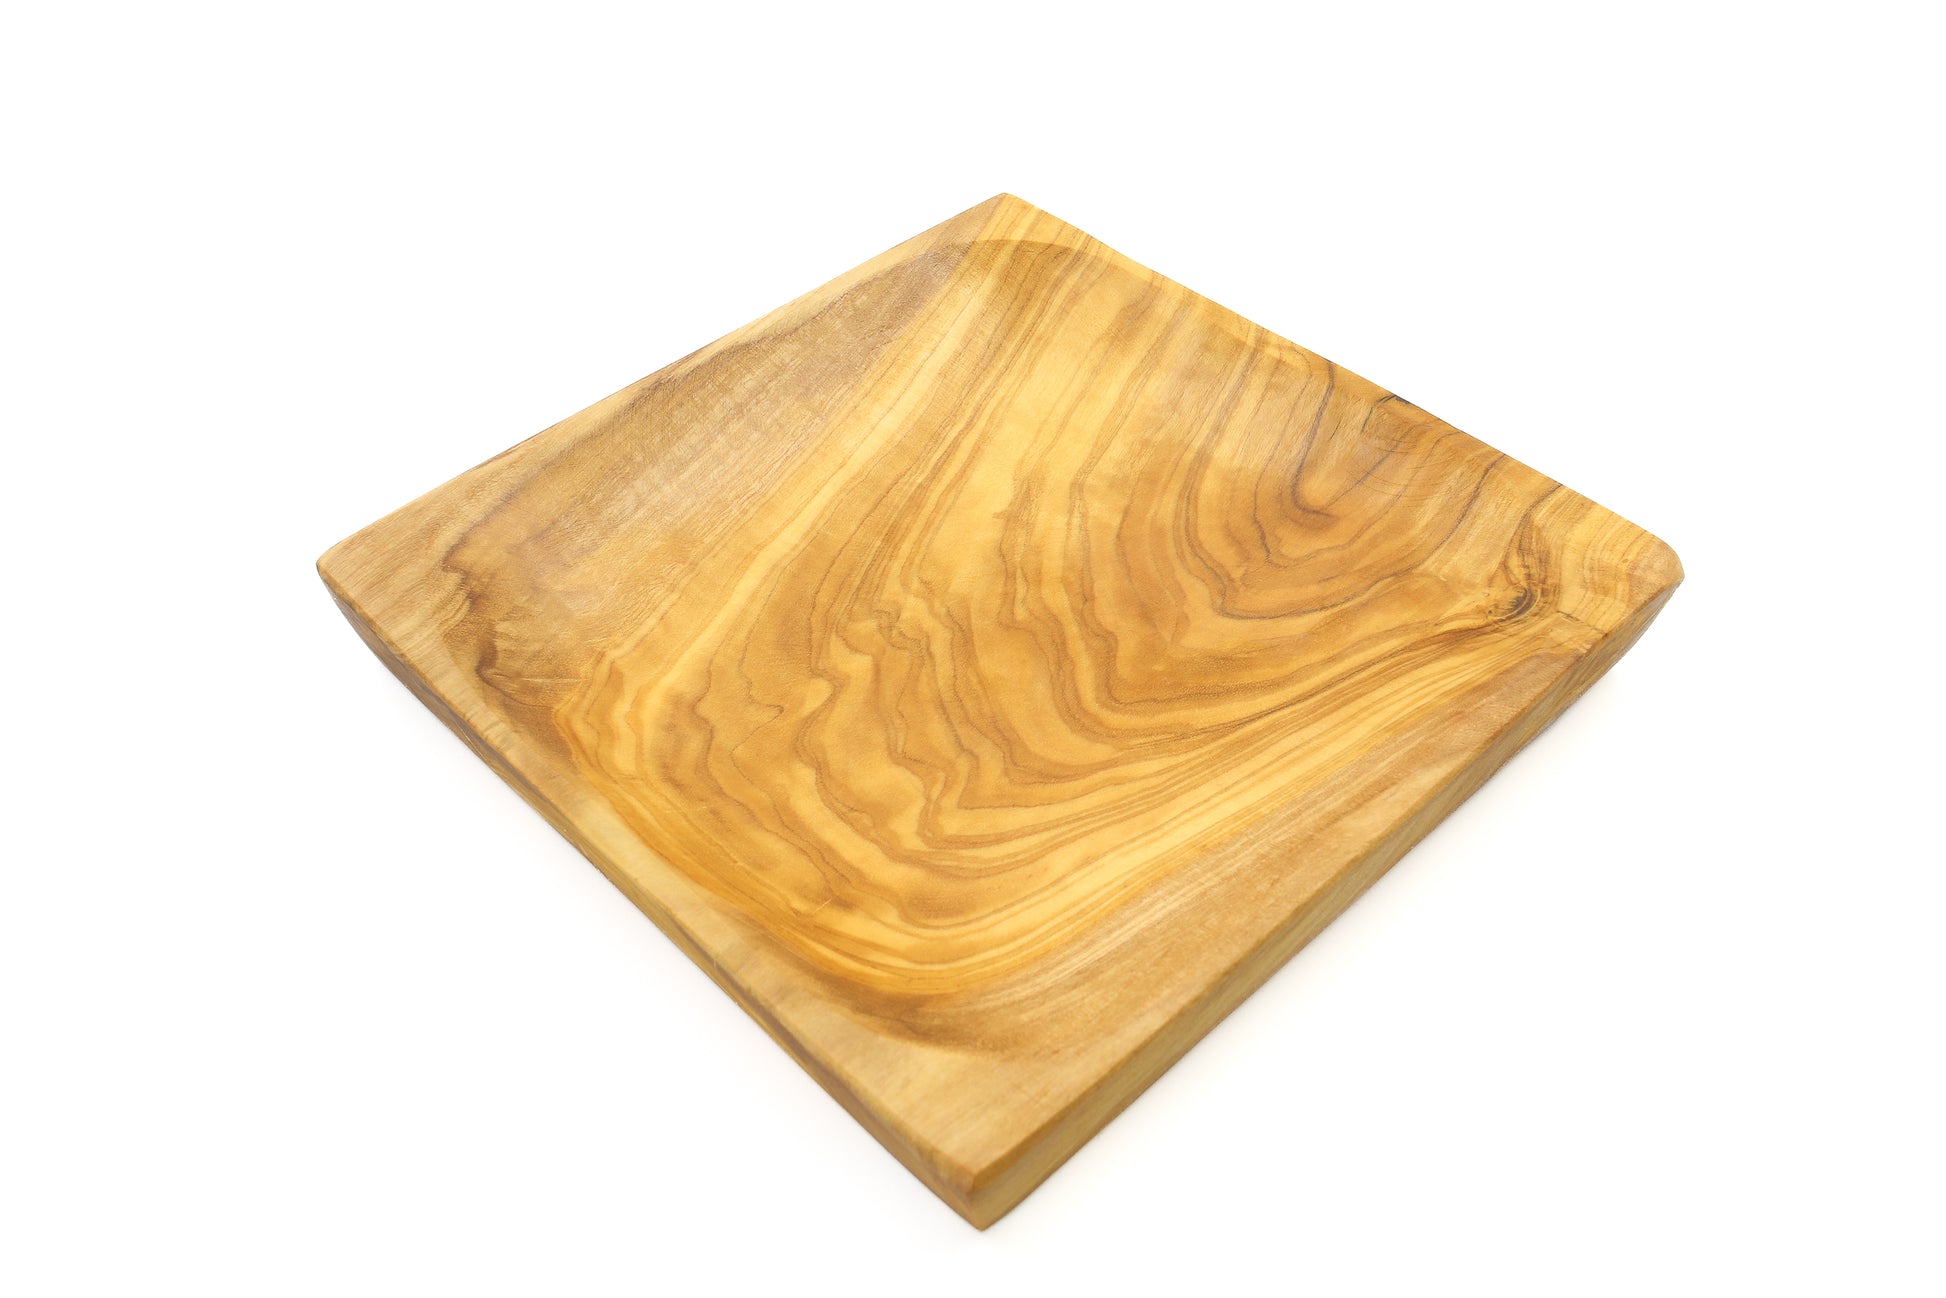 Olive wood plates in both square and rectangular shapes